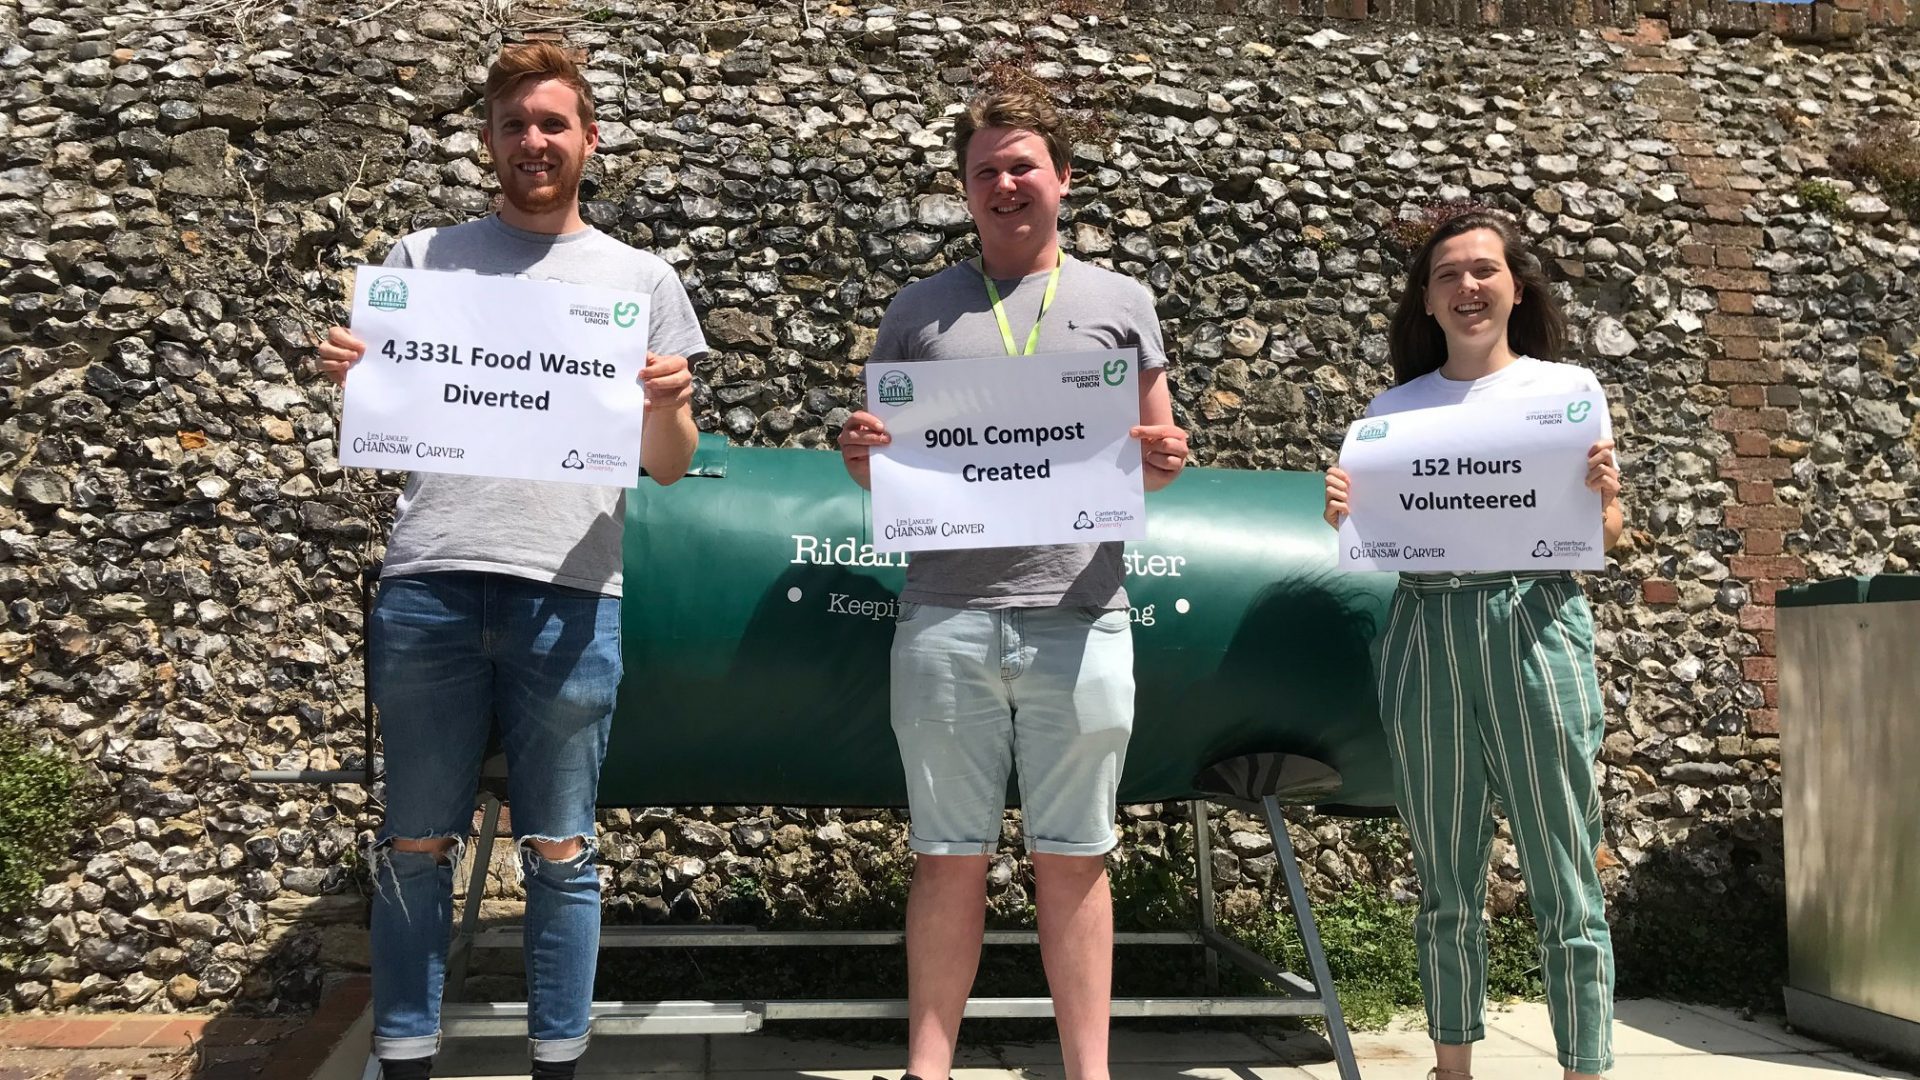 People holding signs with the benefits of composting food waste